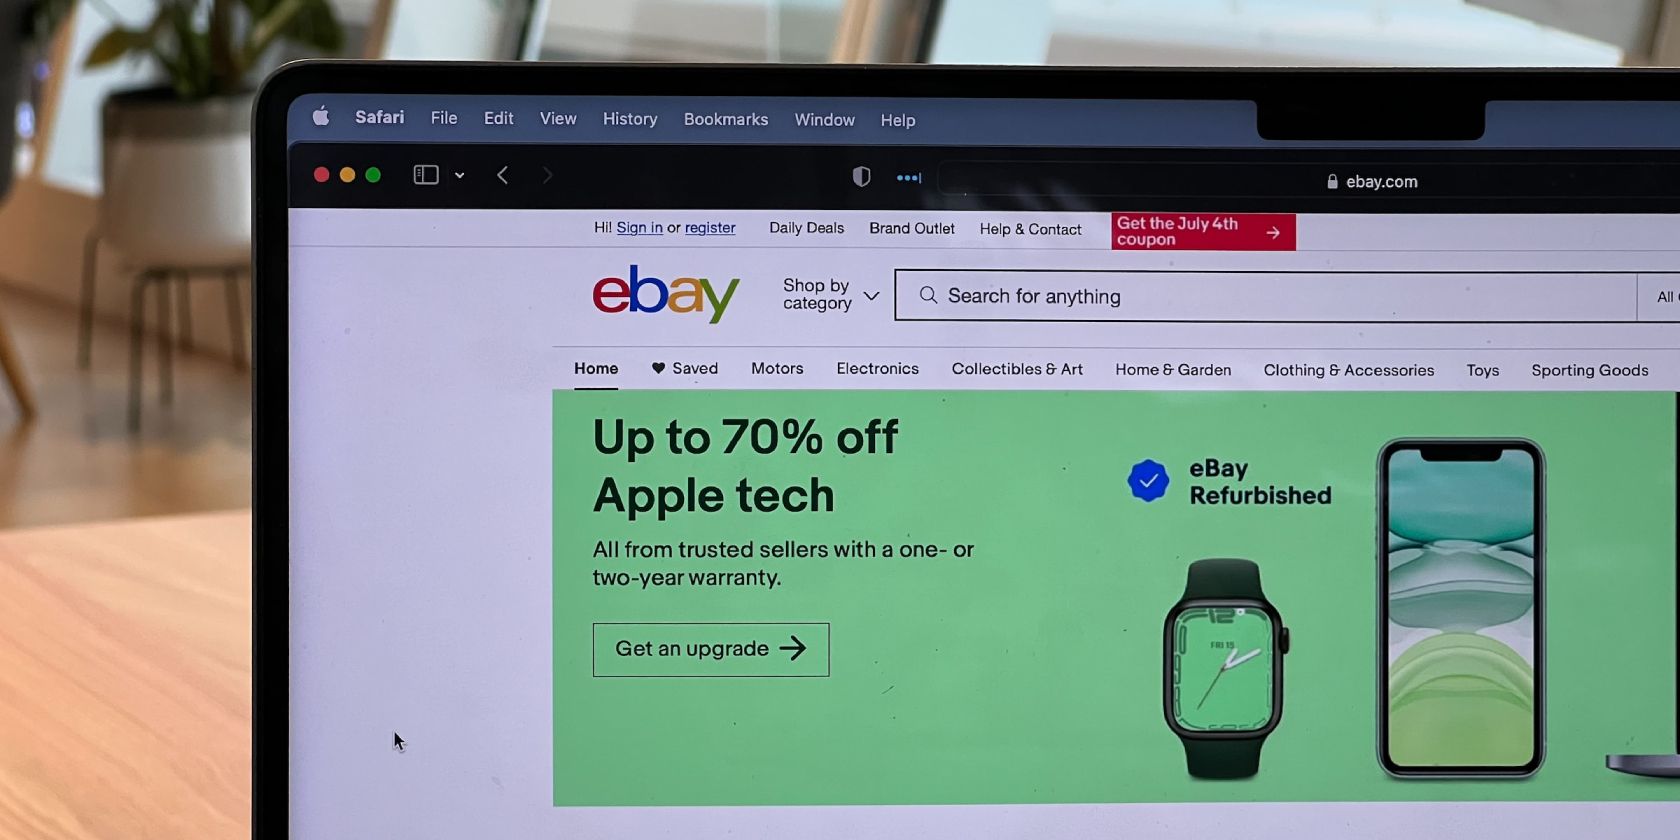 eBay's homepage opened on a laptop